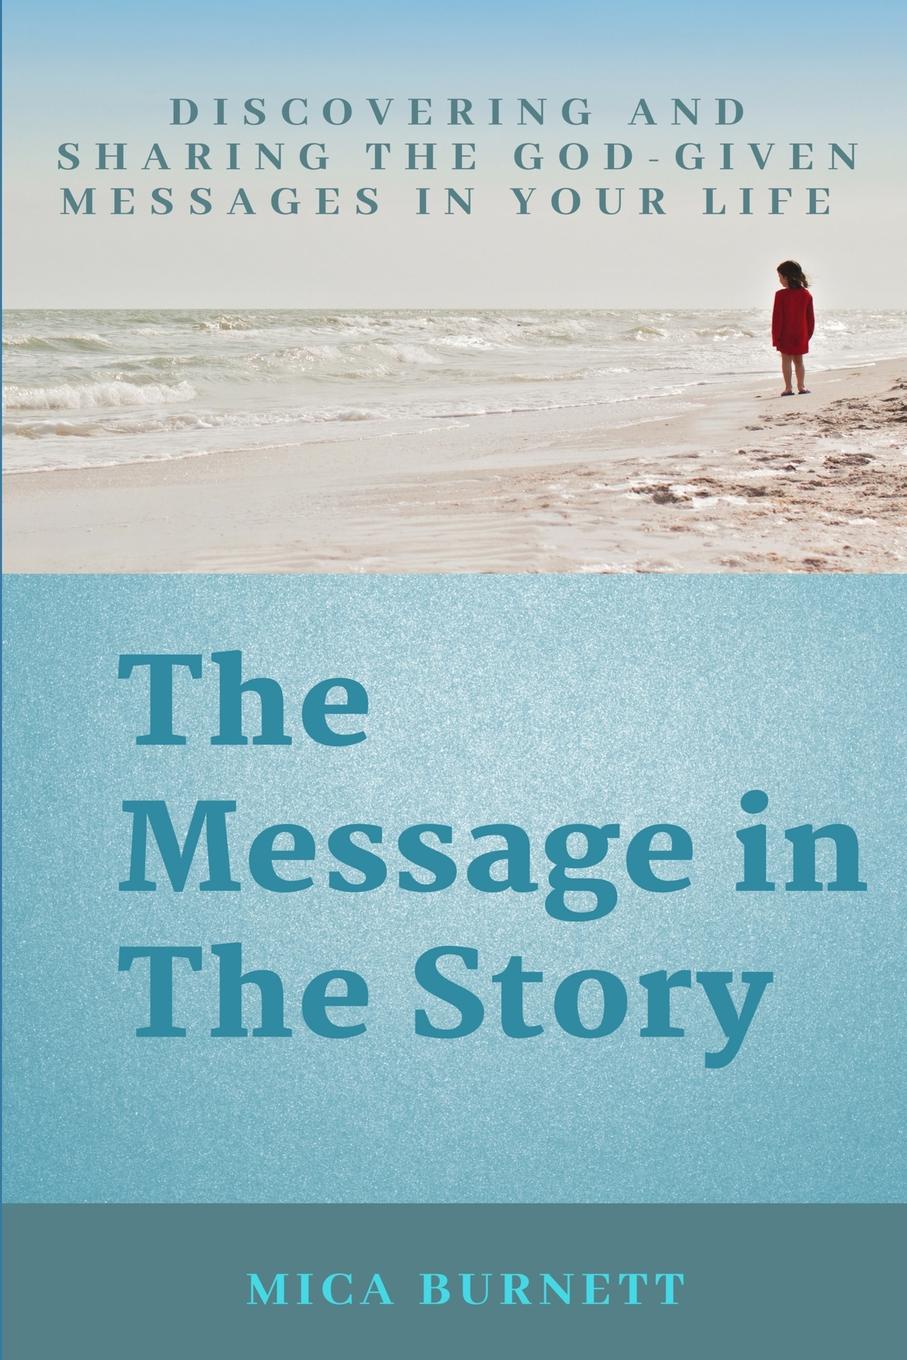 Discover the story. God giving messages.